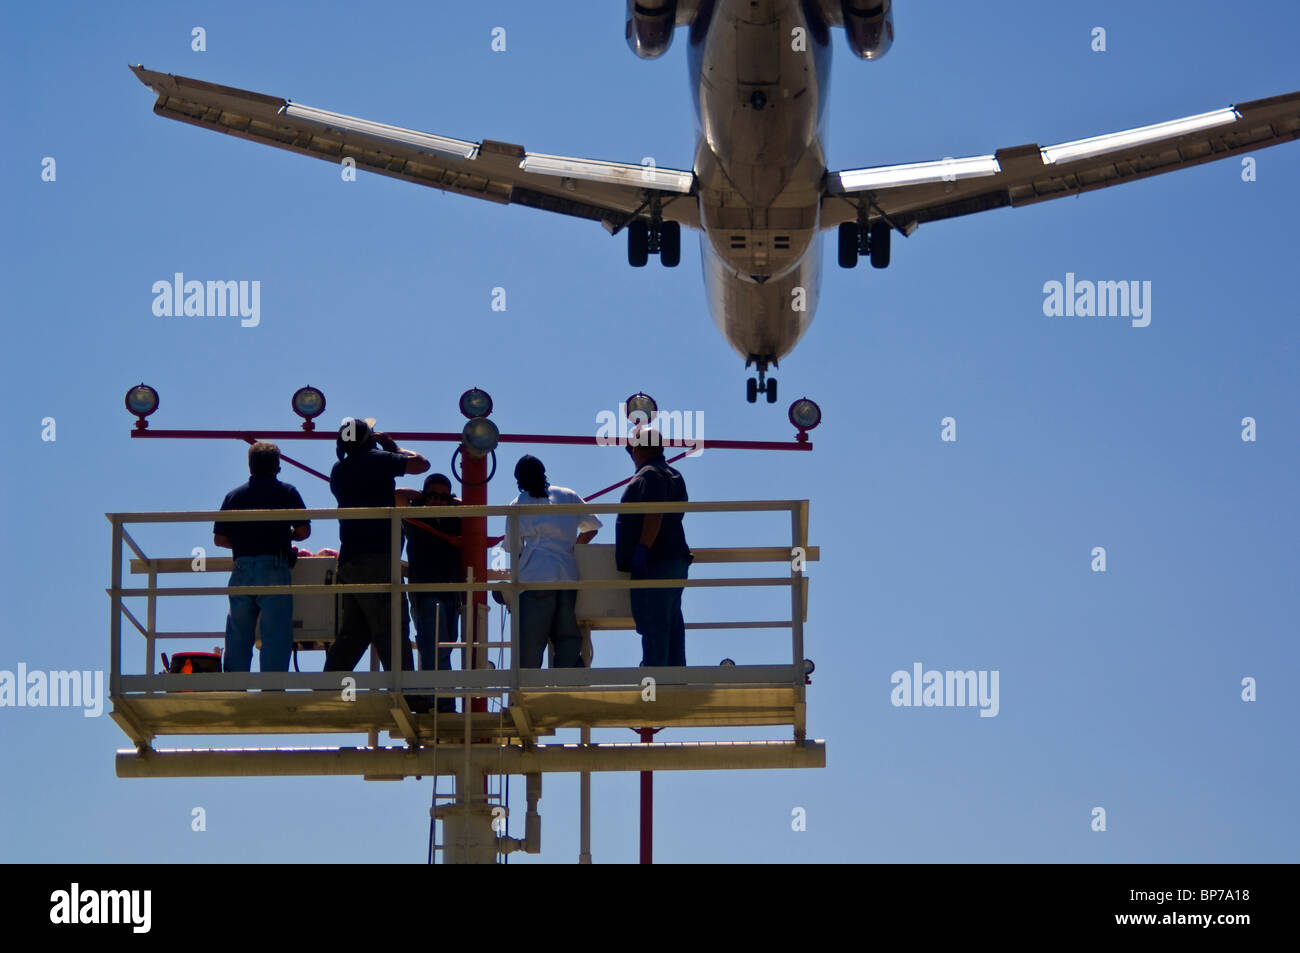 People working on runway approach lights beneath jet airplane landing at Los Angeles Int'l Airport LAX, California Stock Photo